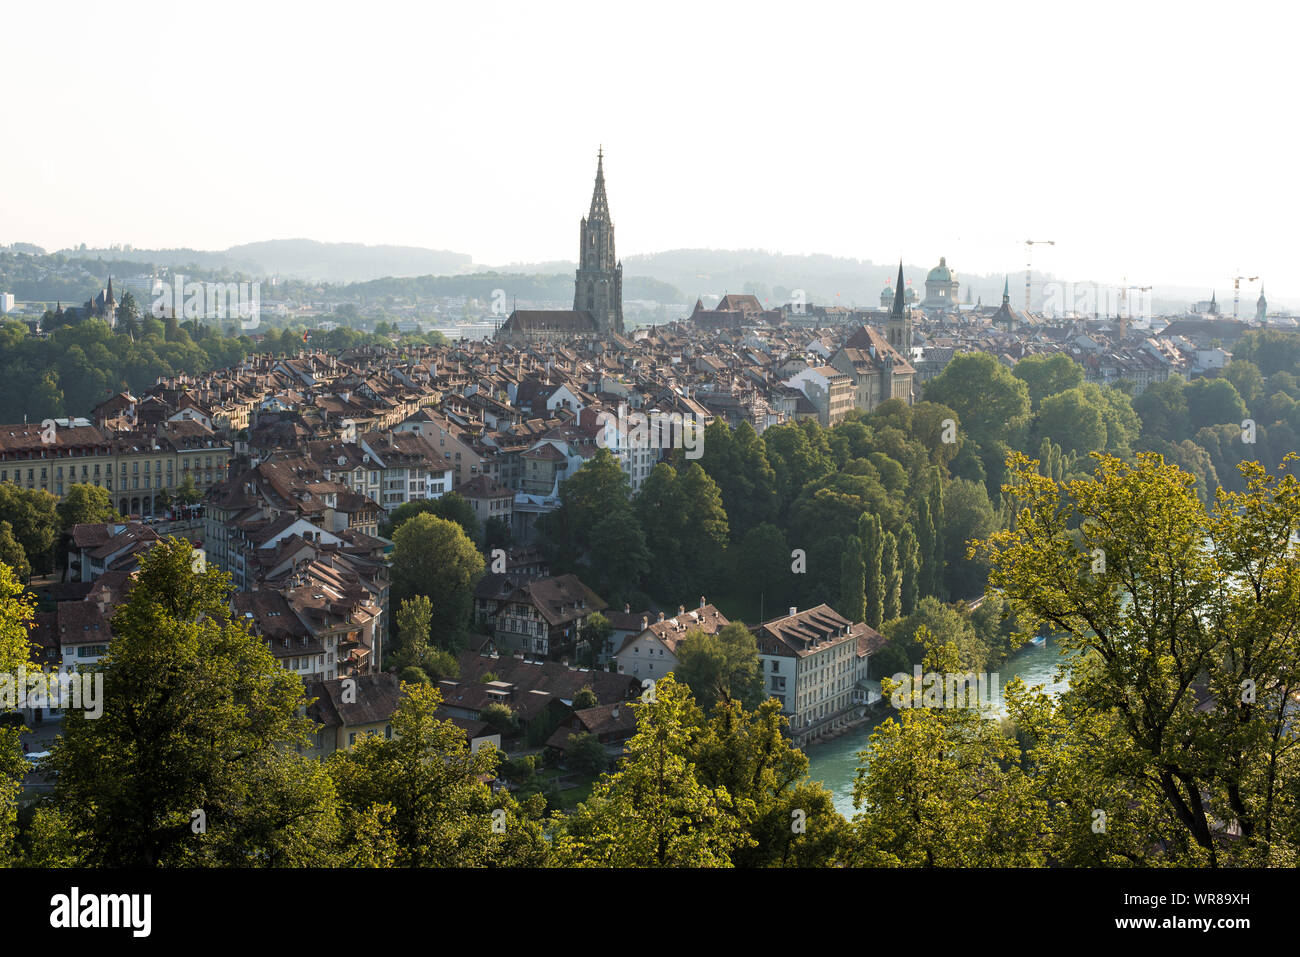 View over the old town of Bern, Switzerland, on a late summer afternoon. Stock Photo